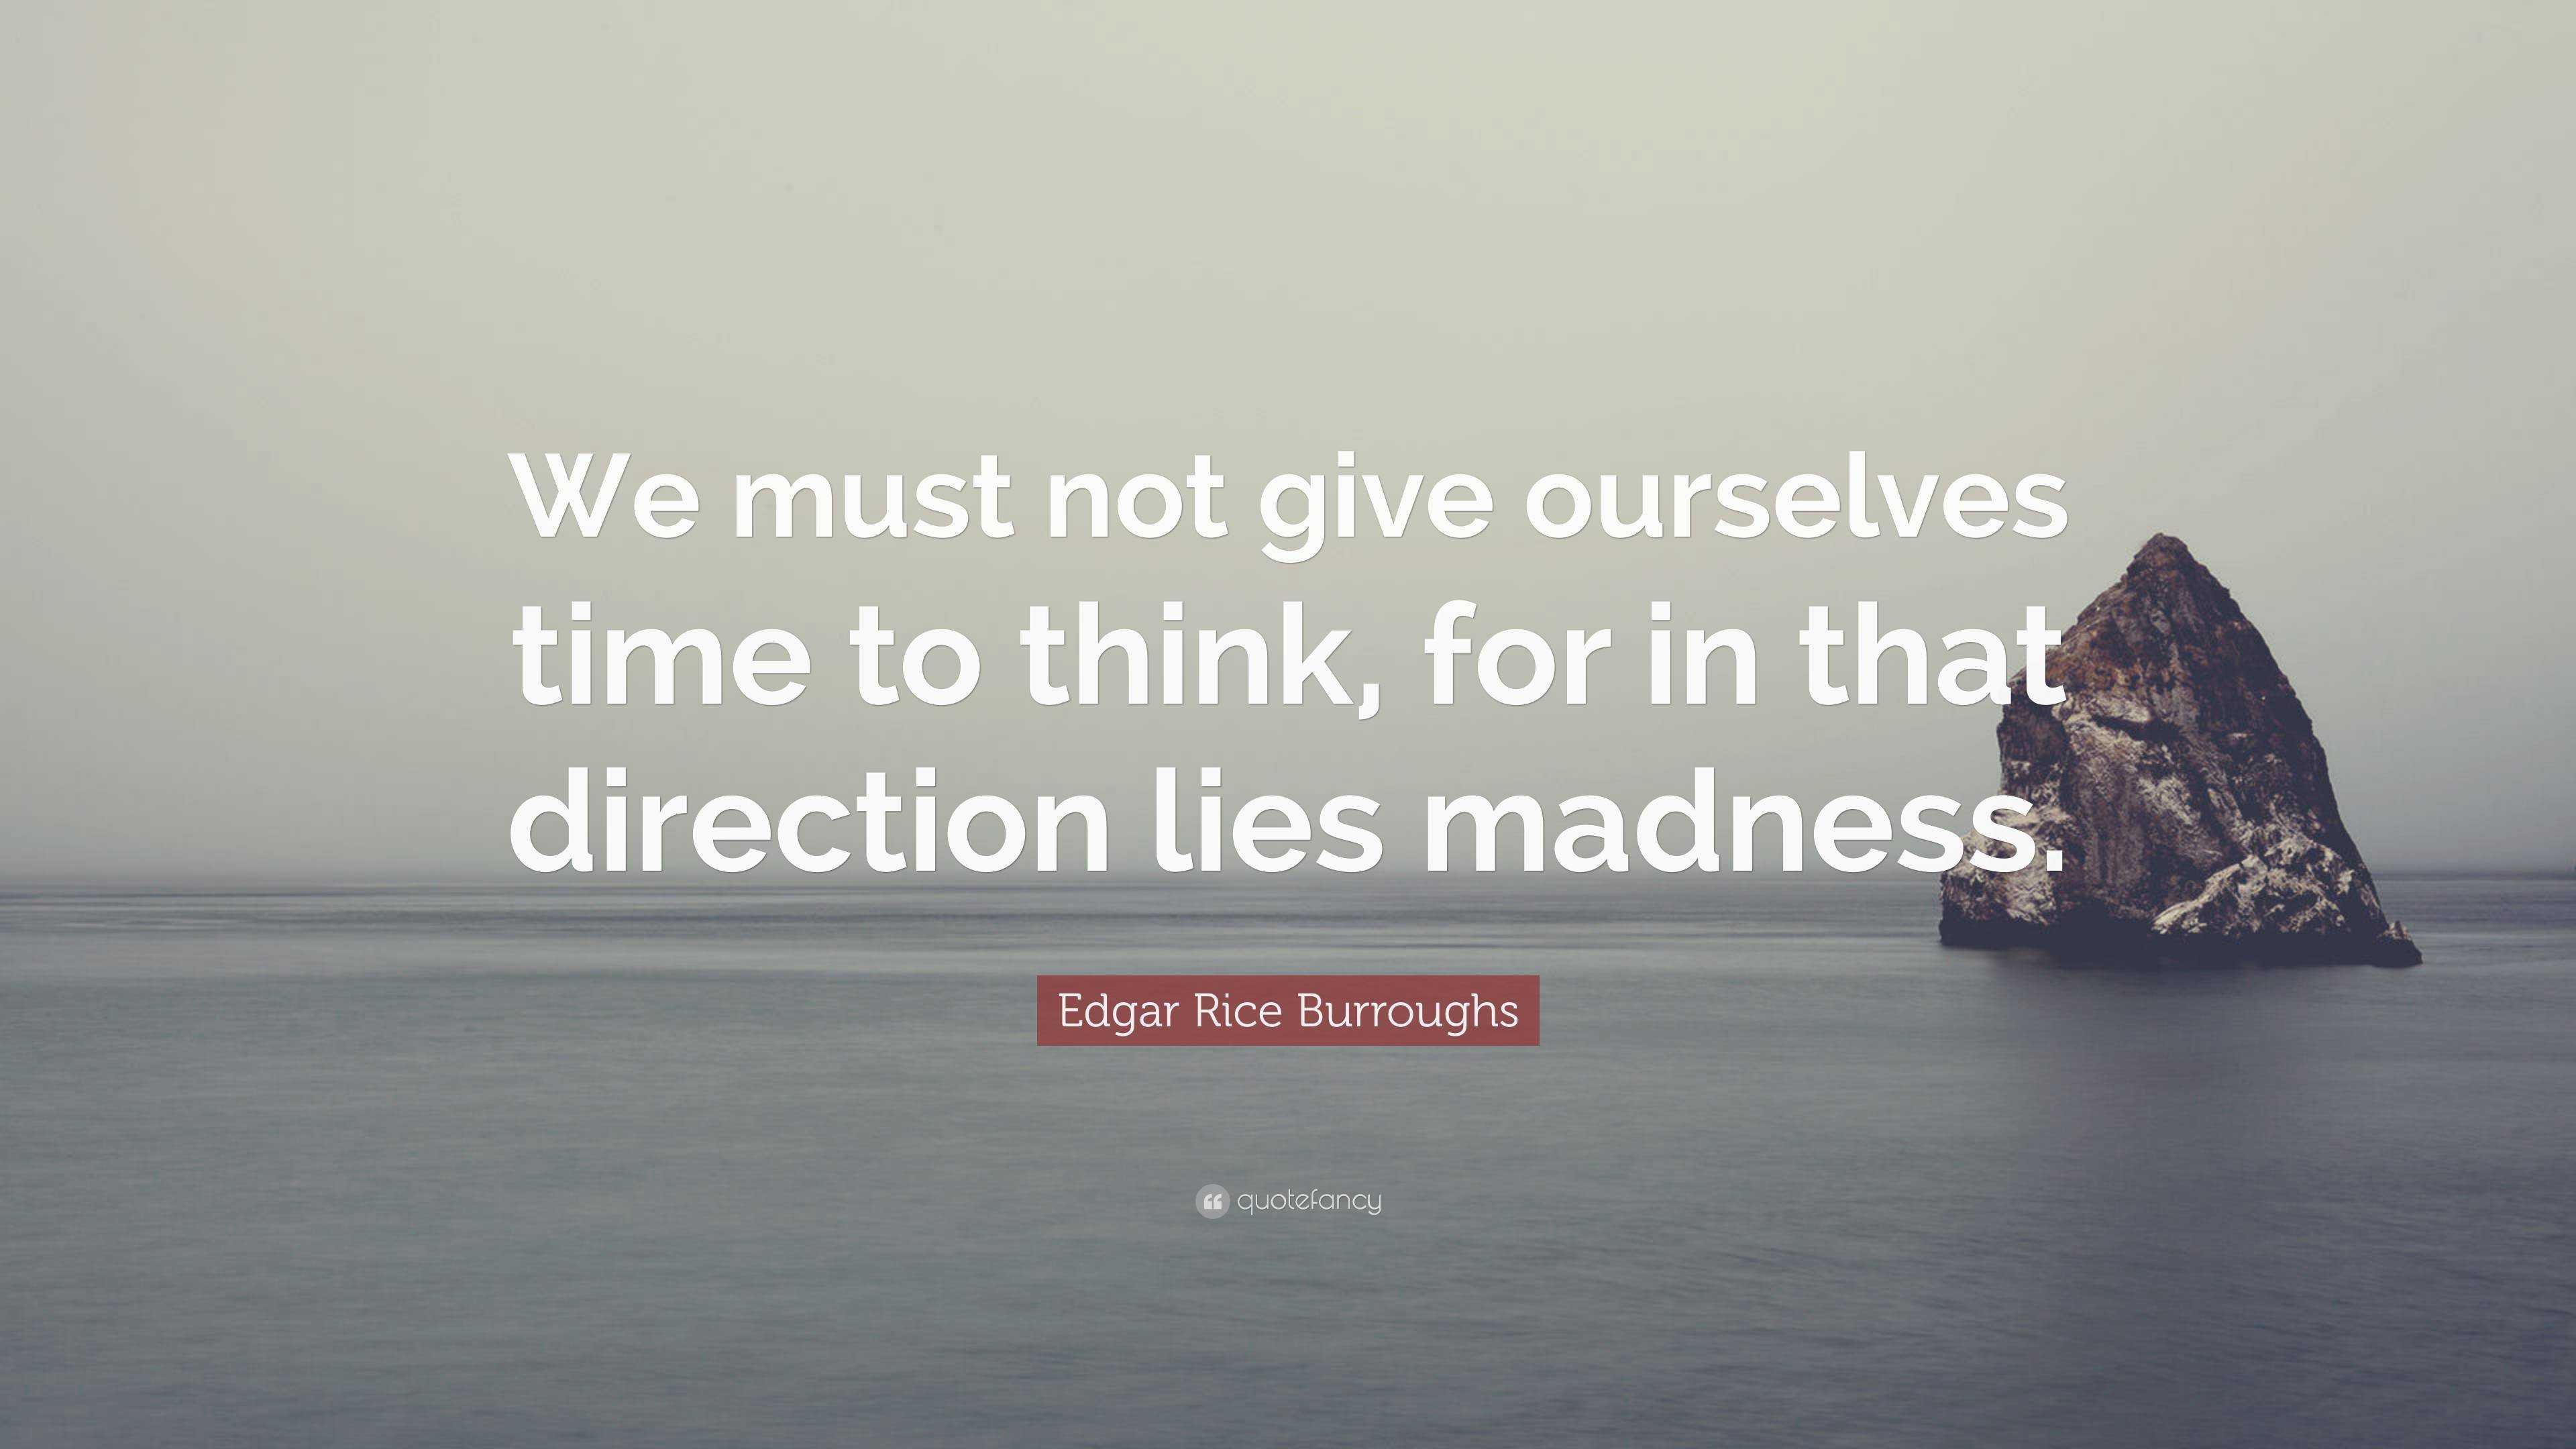 Edgar Rice Burroughs Quote: “We must not give ourselves time to think ...